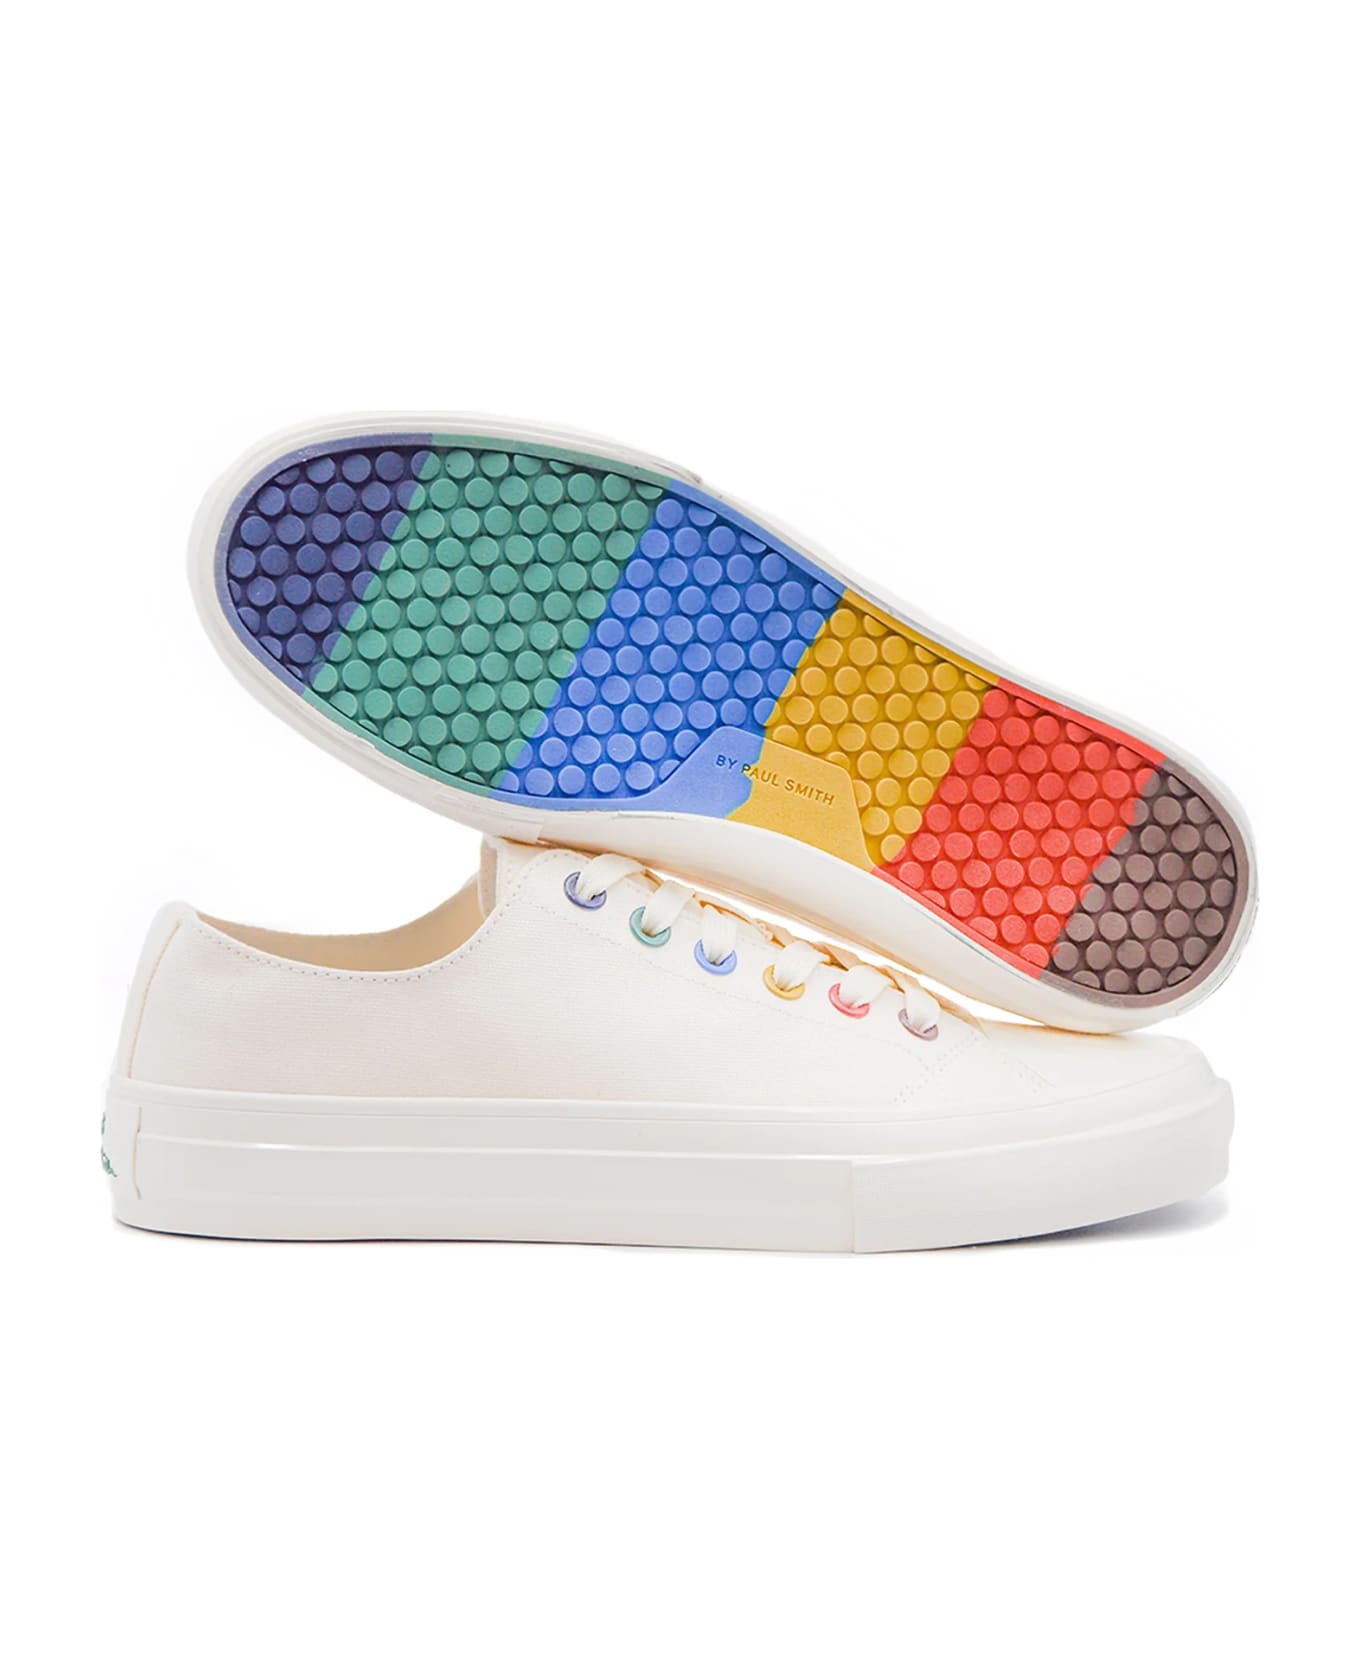 Paul Smith Kinset Canvas Sneakers - White